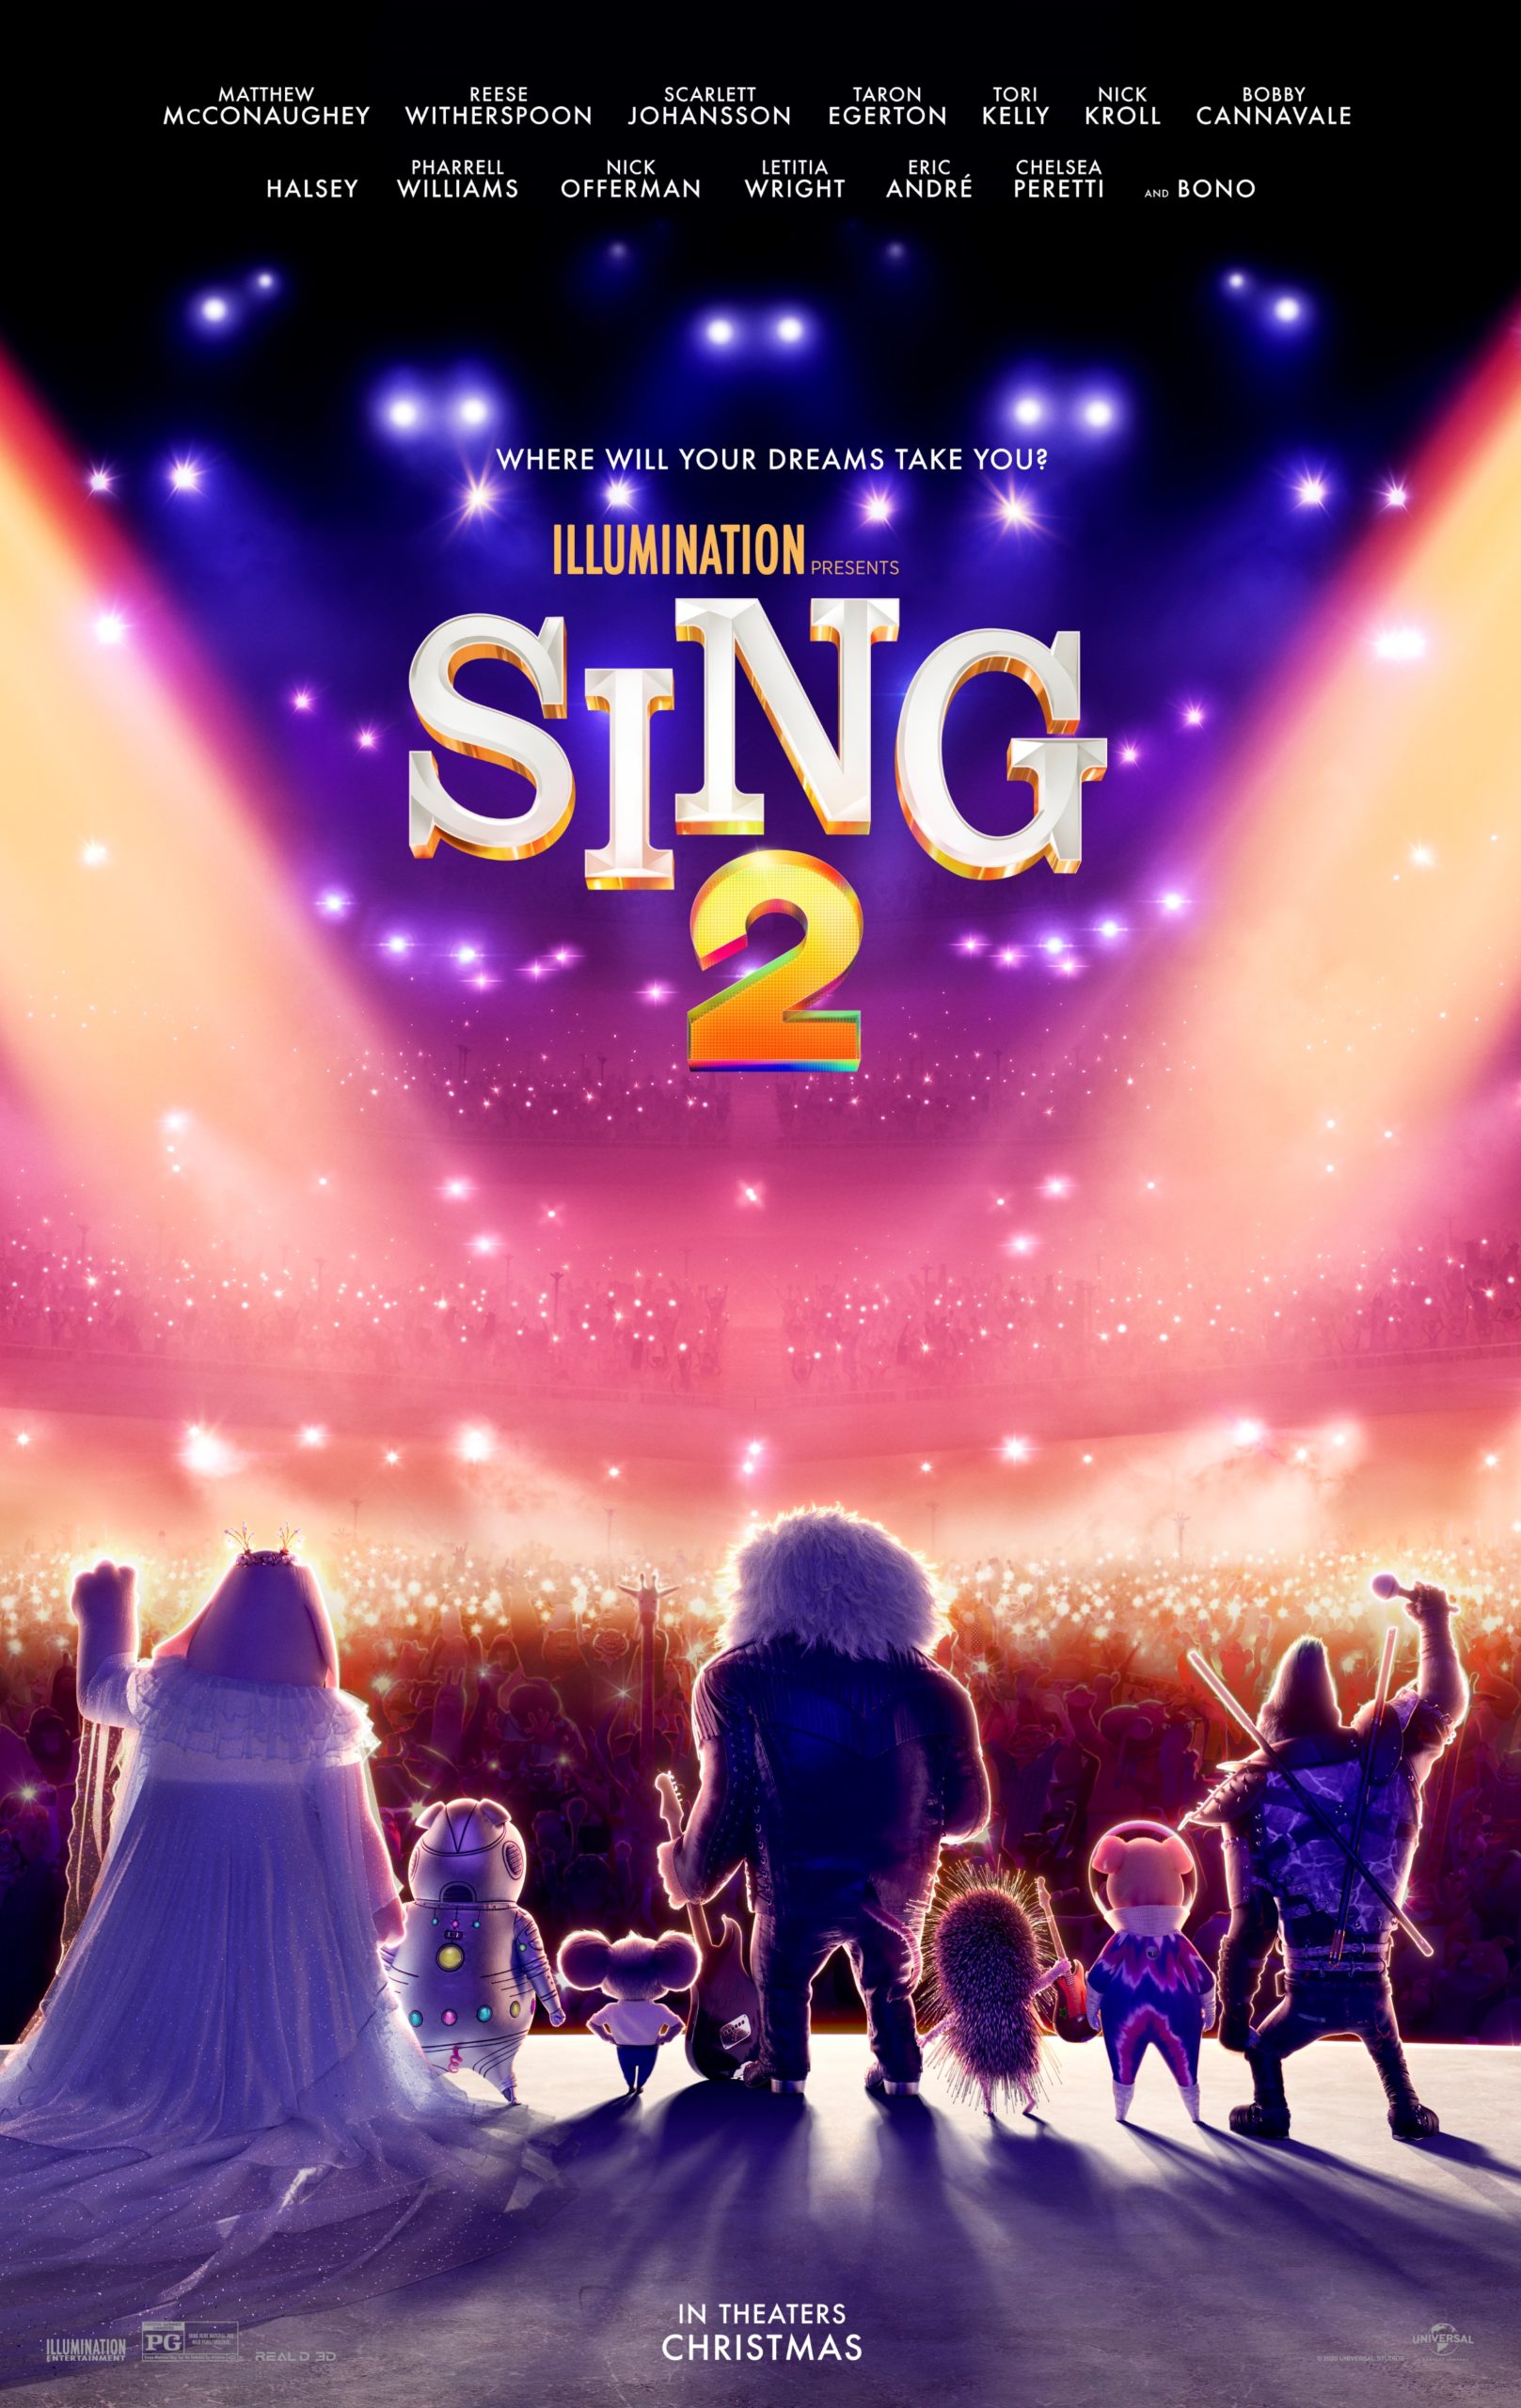 image001-647x1024 Watch The New Sing 2 Movie Trailer